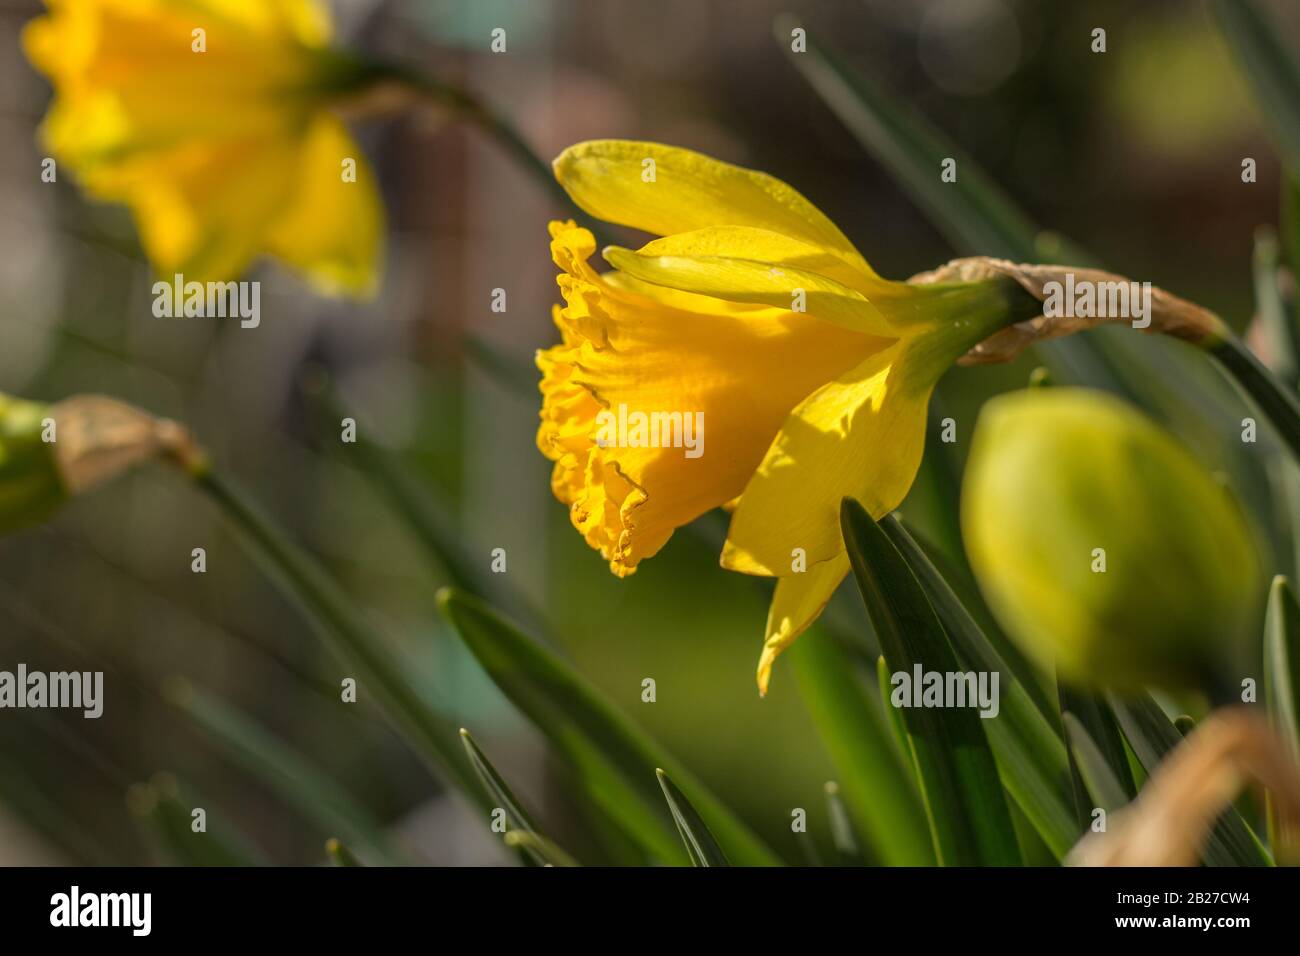 Daffodil yellow flowers close-up with green grass. Stock Photo